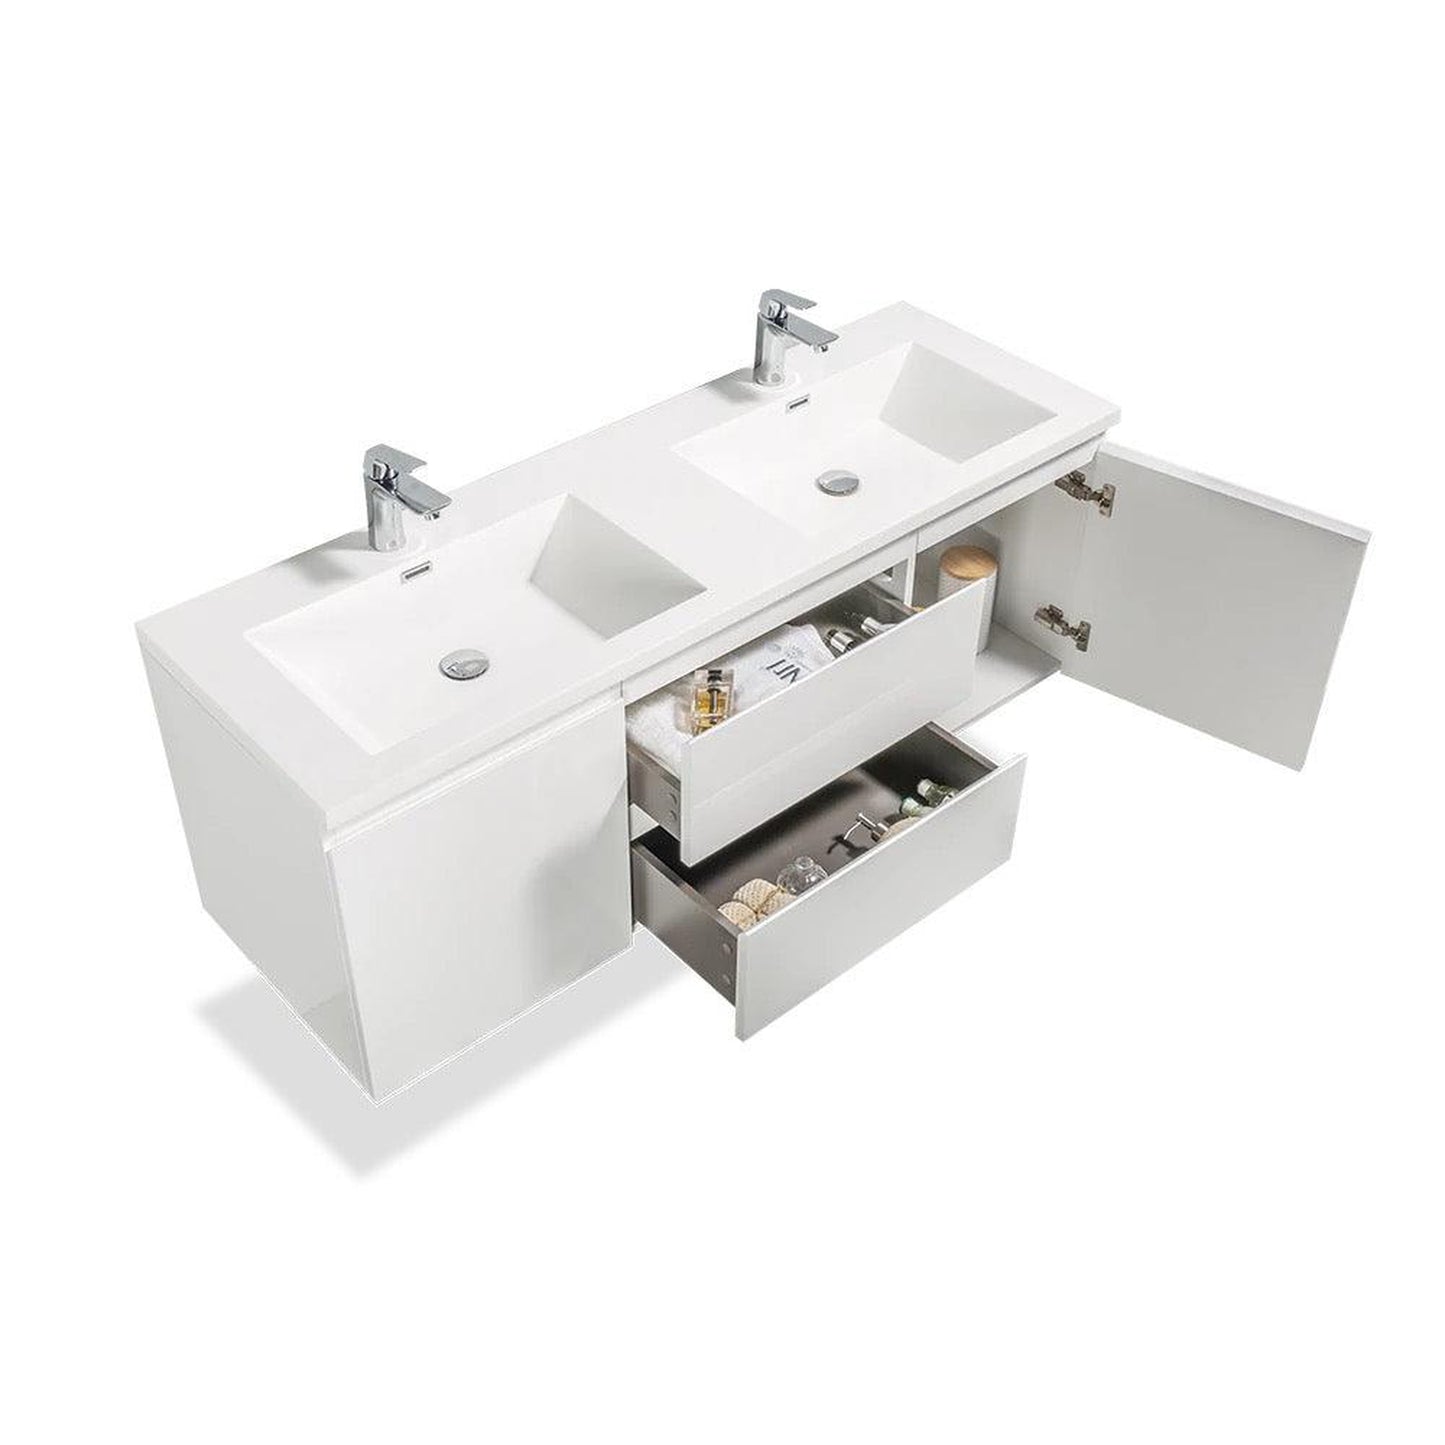 TONA Angela 48" White Wall-Mounted Bathroom Vanity With Faux Marble Integrated Top & Double Sink